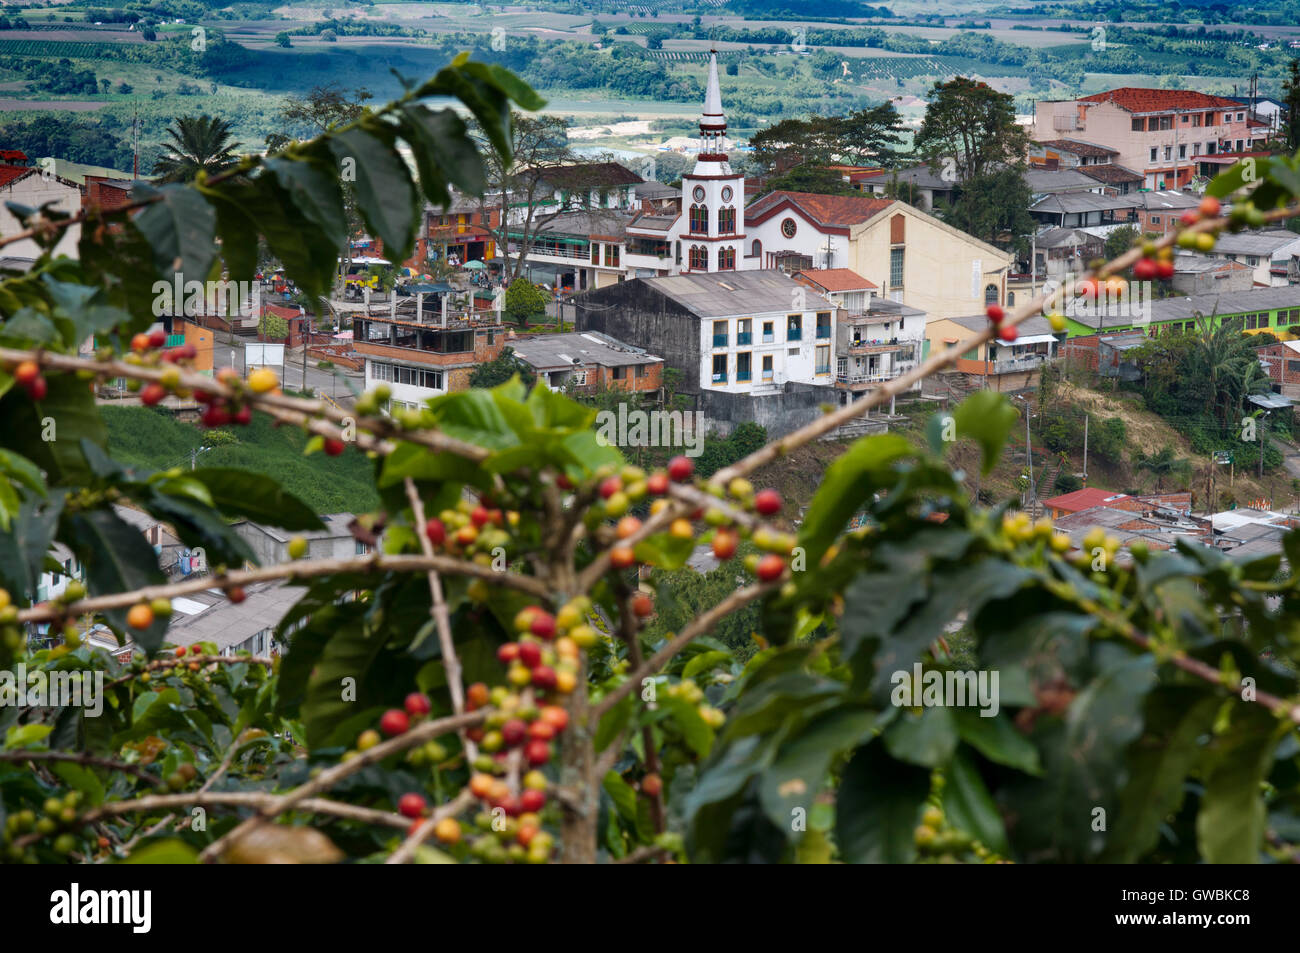 Coffee plantations near the town Buenavista. Quindio, Colombia. Colombian coffee growing axis. The Colombian coffee Region, also known as the Coffee Triangle, is a part of the Colombian Paisa region in the rural area of Colombia, famous for growing and production of a majority of the Colombian coffee, considered by some as the best coffee in the world. Stock Photo